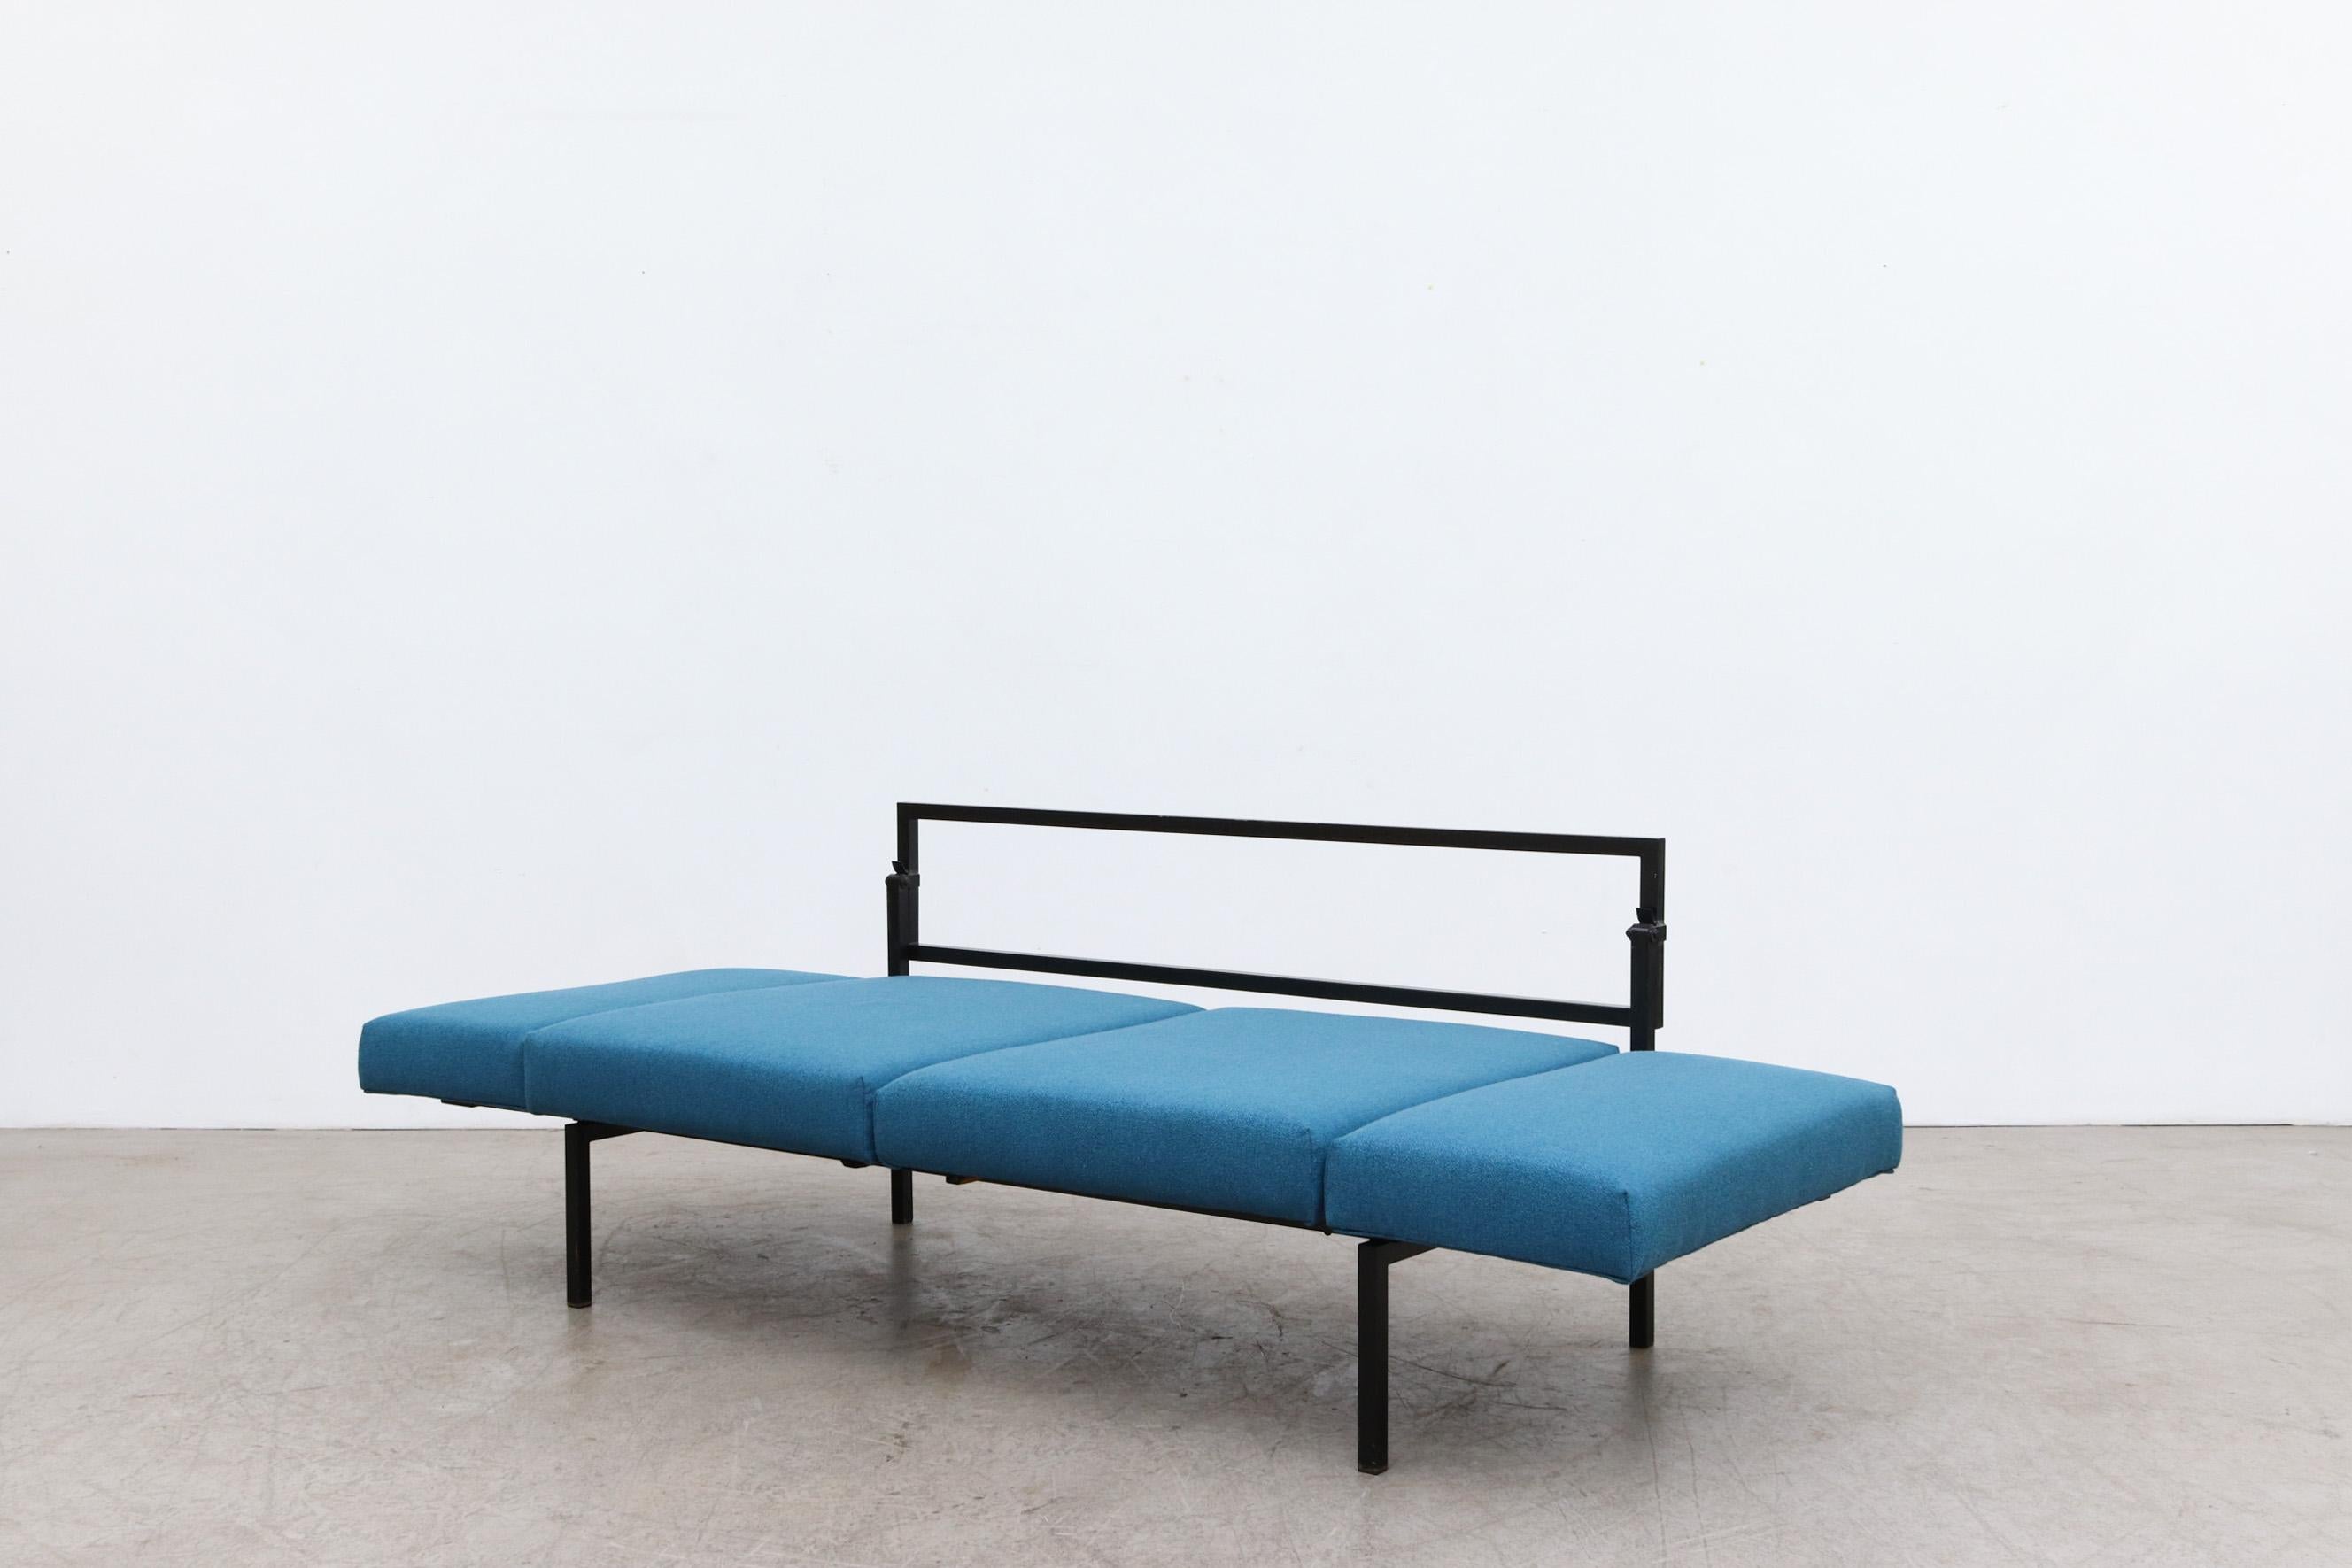 Coen de Vries for Pilastro Convertible Loveseat with Blue Cushions 1